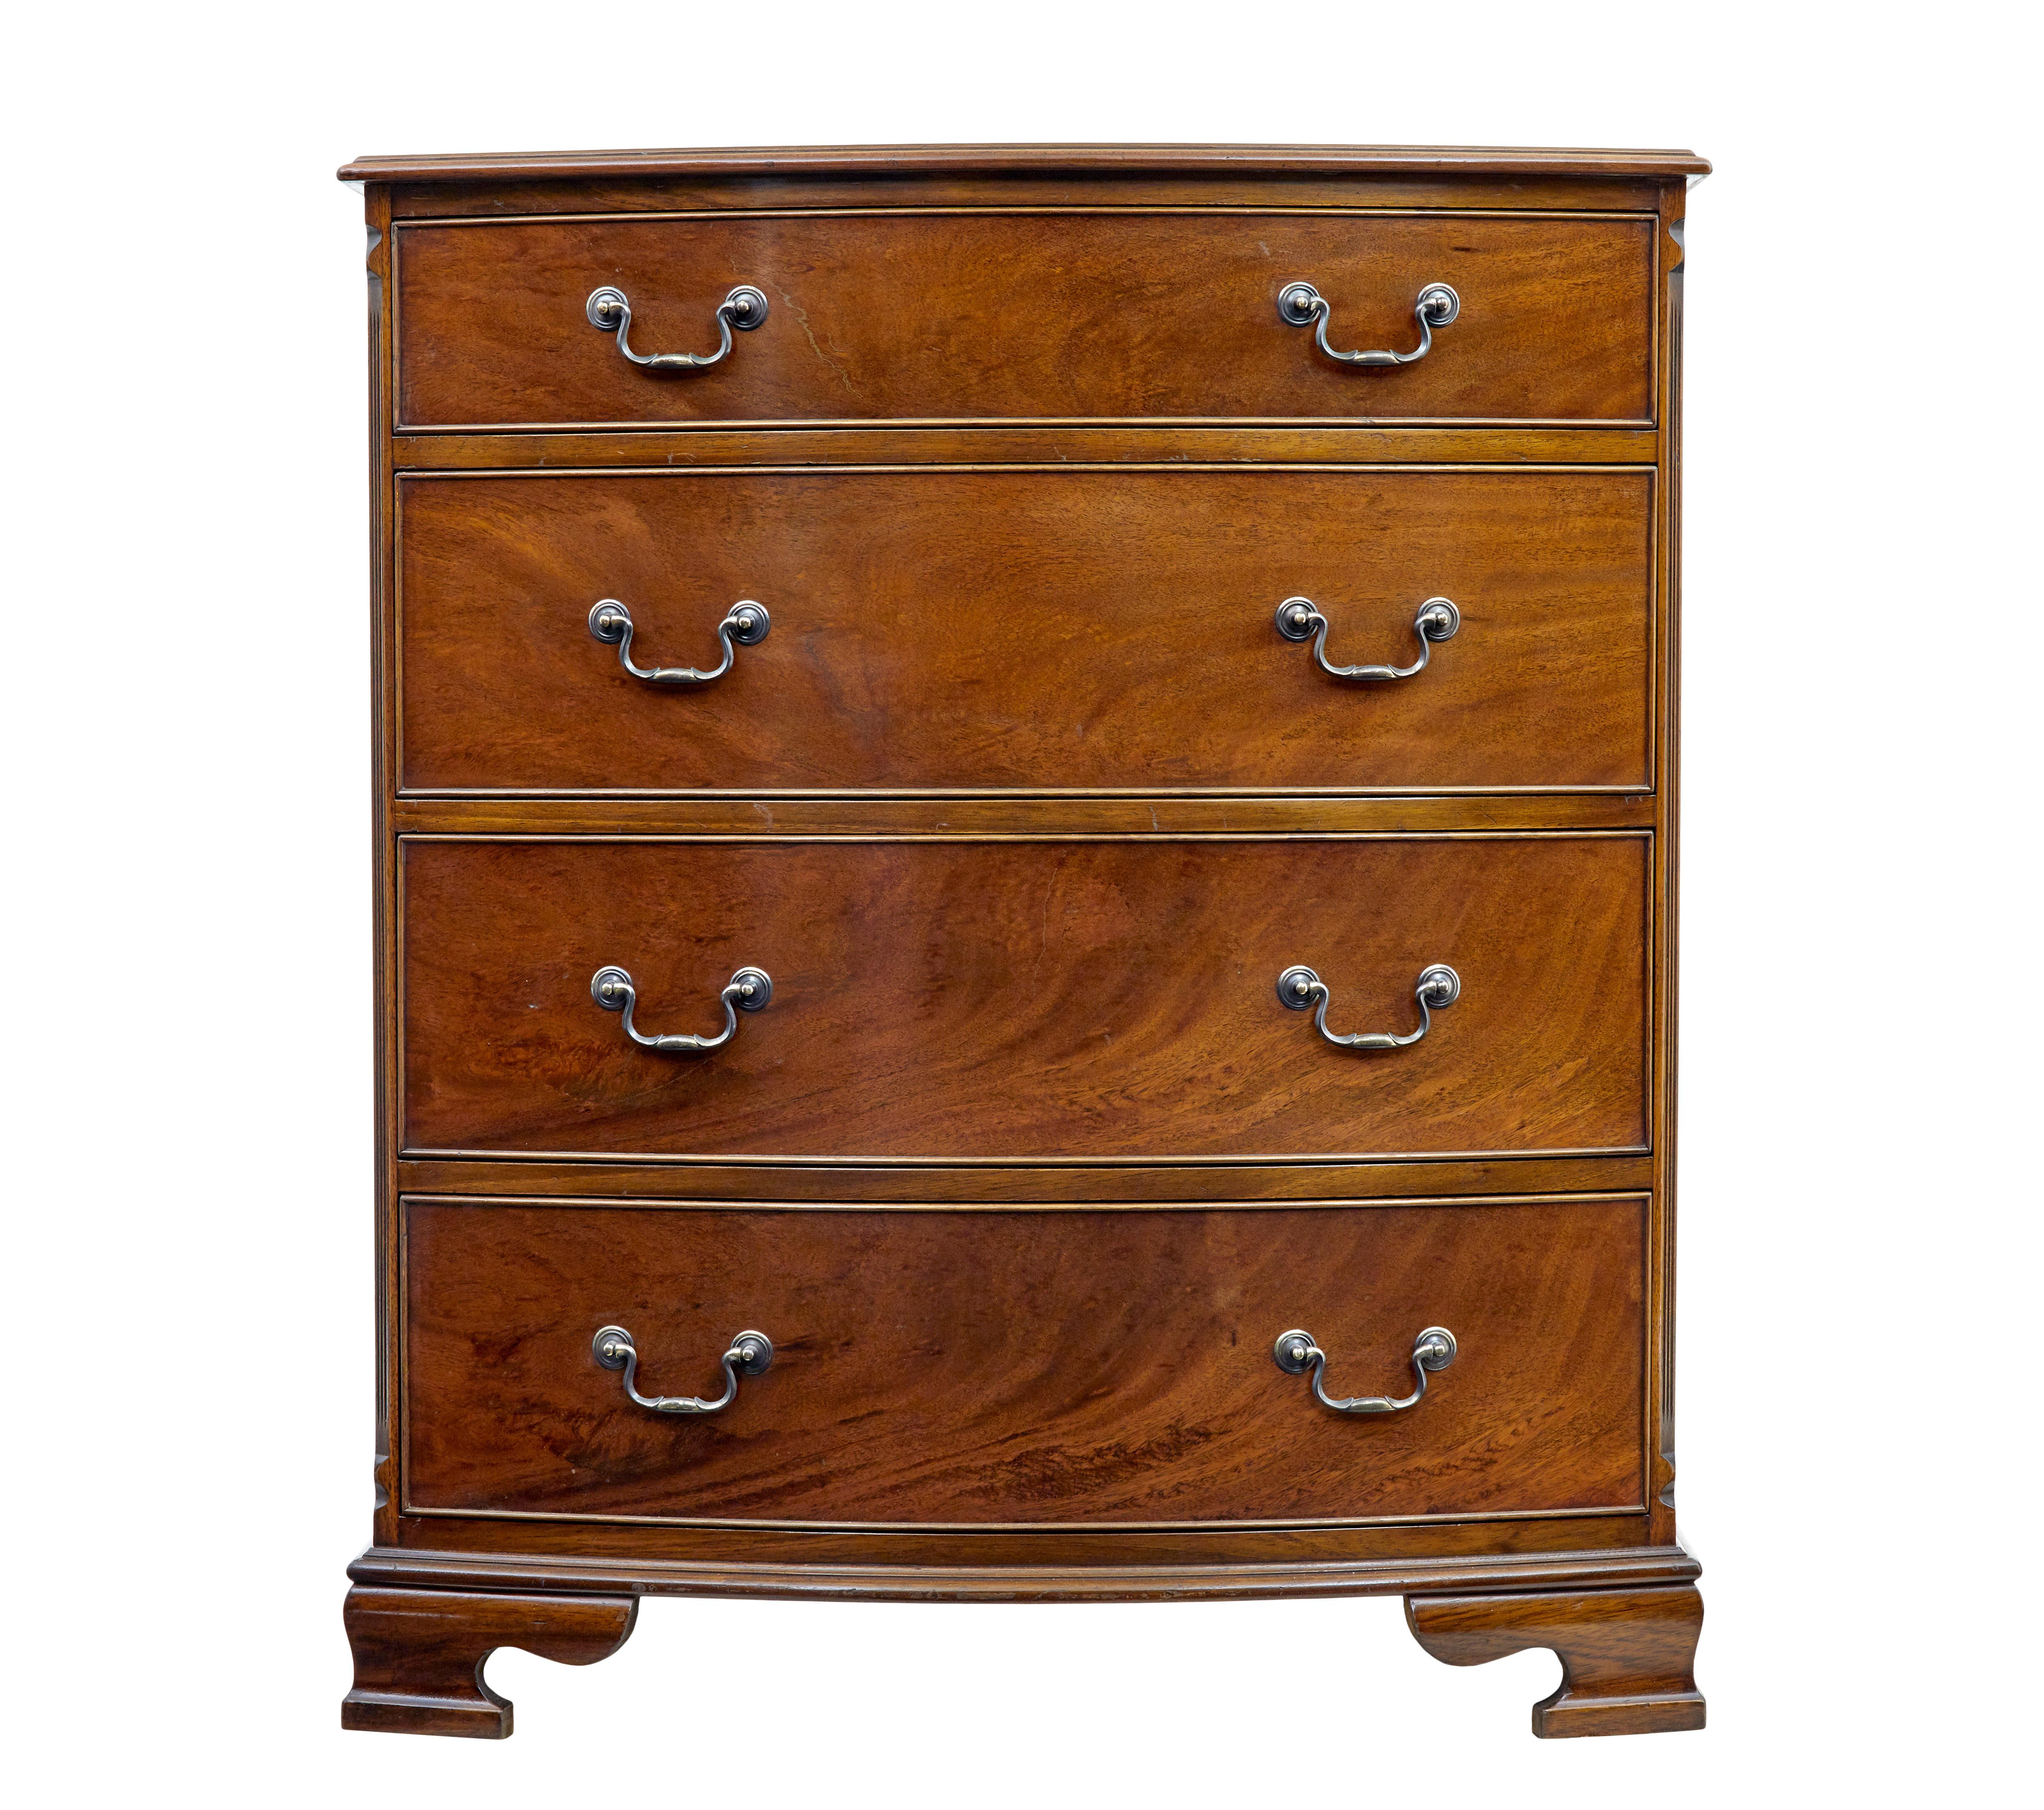 Good quality mahogany chest of drawers by well known English furniture makers Adam Richwood of London.

Copy of a Georgian design, 4 drawers fitted with swan neck handles and cock beading around the edges.  Canted corners.  Cross banded top surface